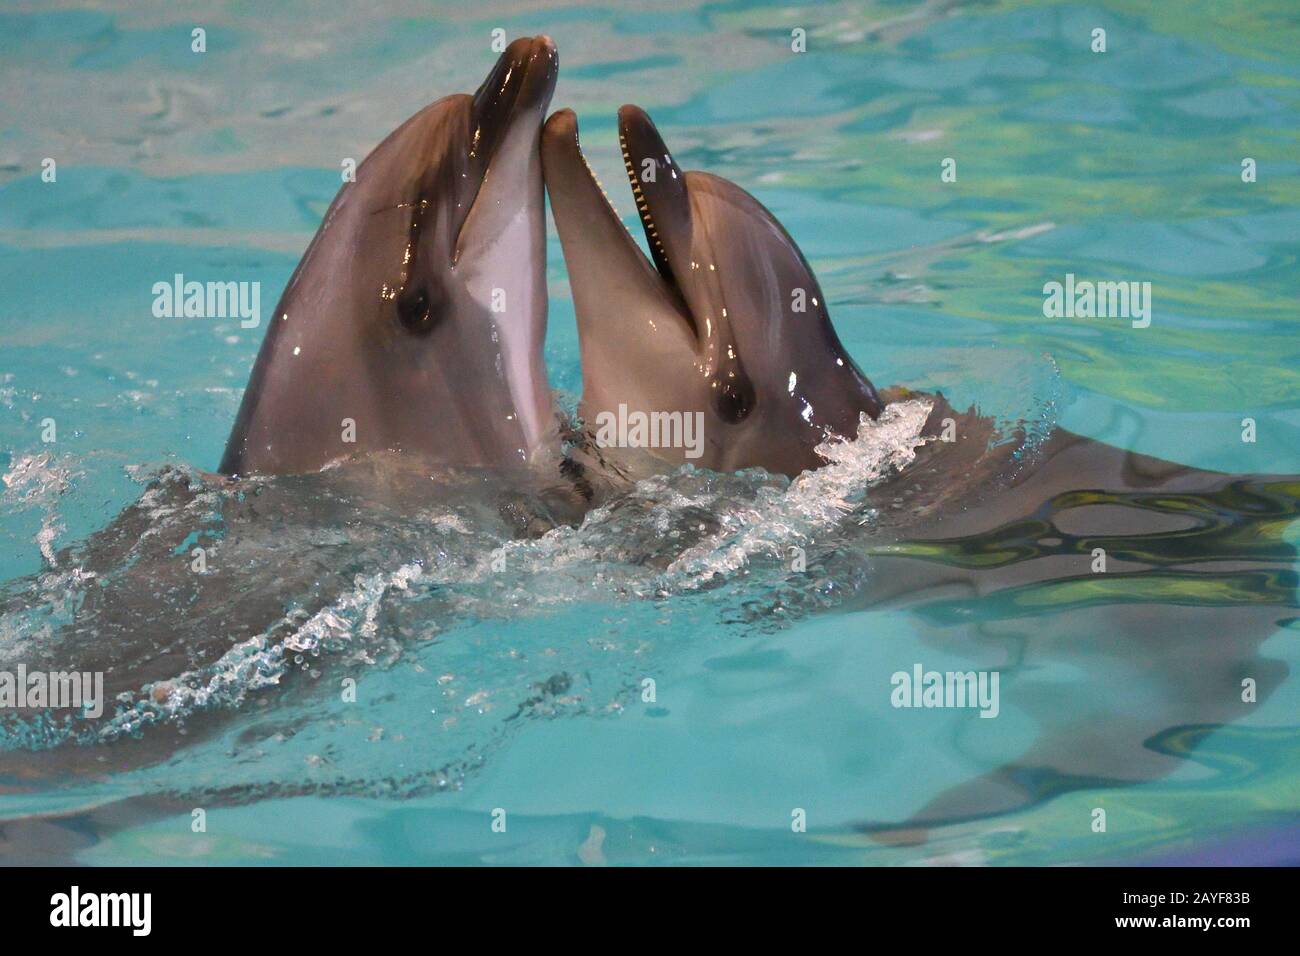 A pair of dolphins swim and play in the water Stock Photo